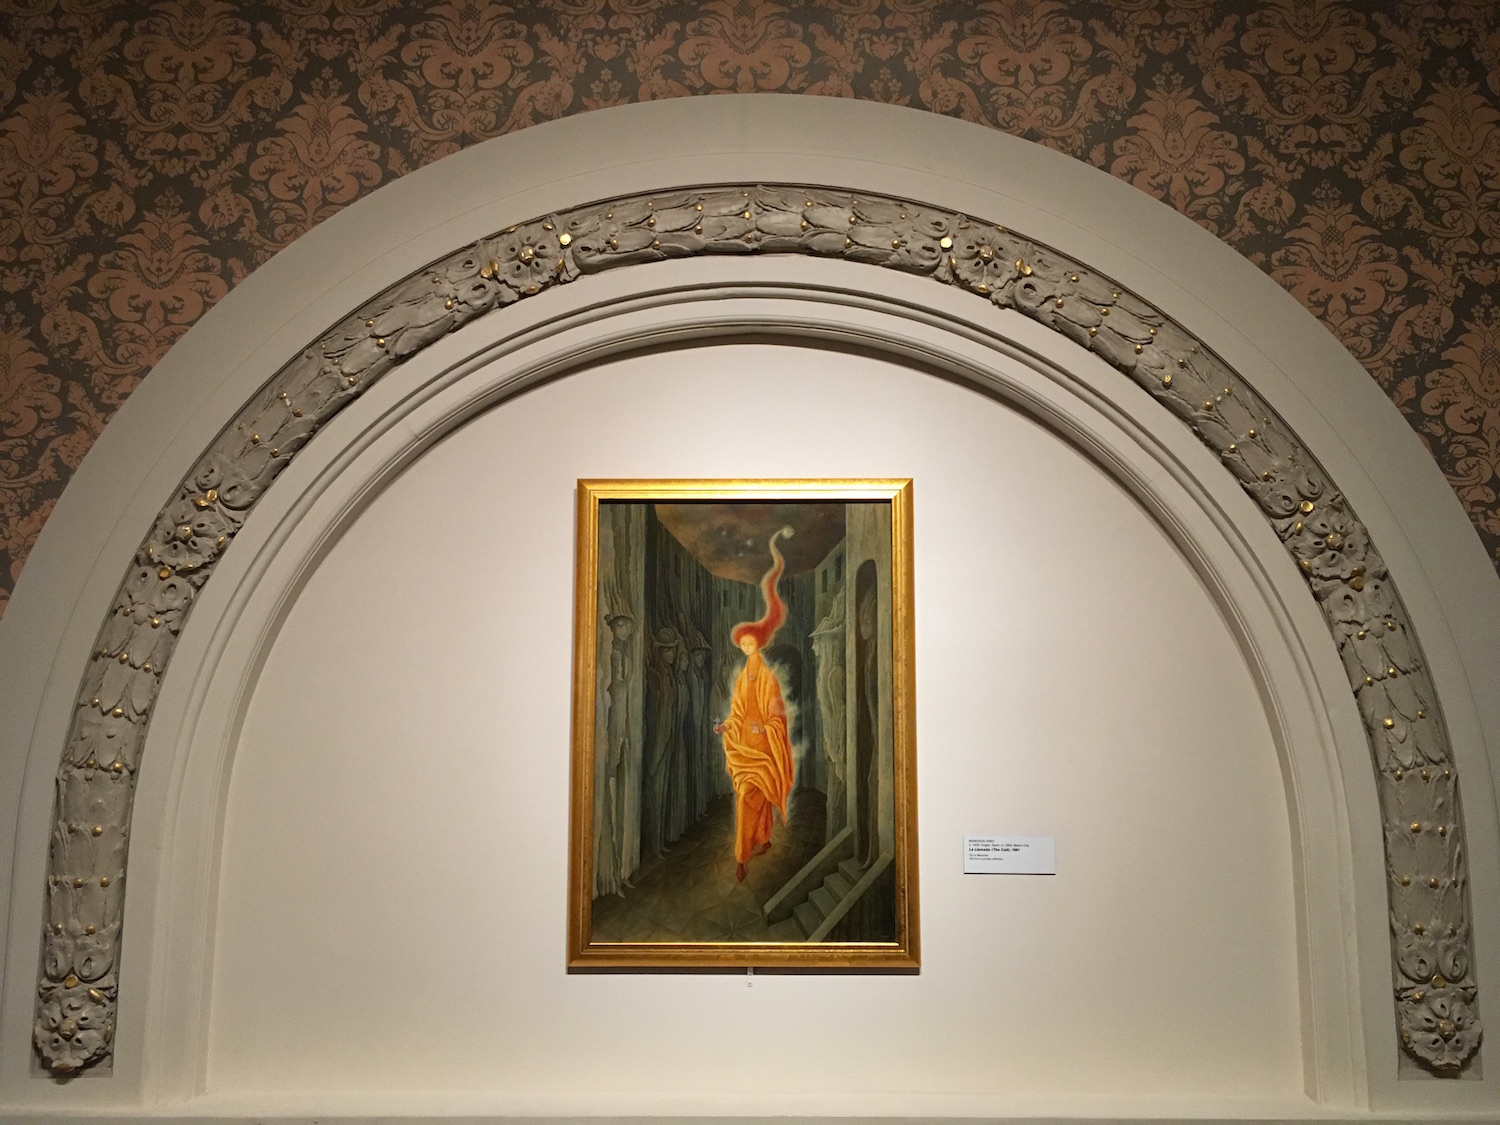 National Museum of Women in the Arts - La Llamada (The Call) by Remedios Varo